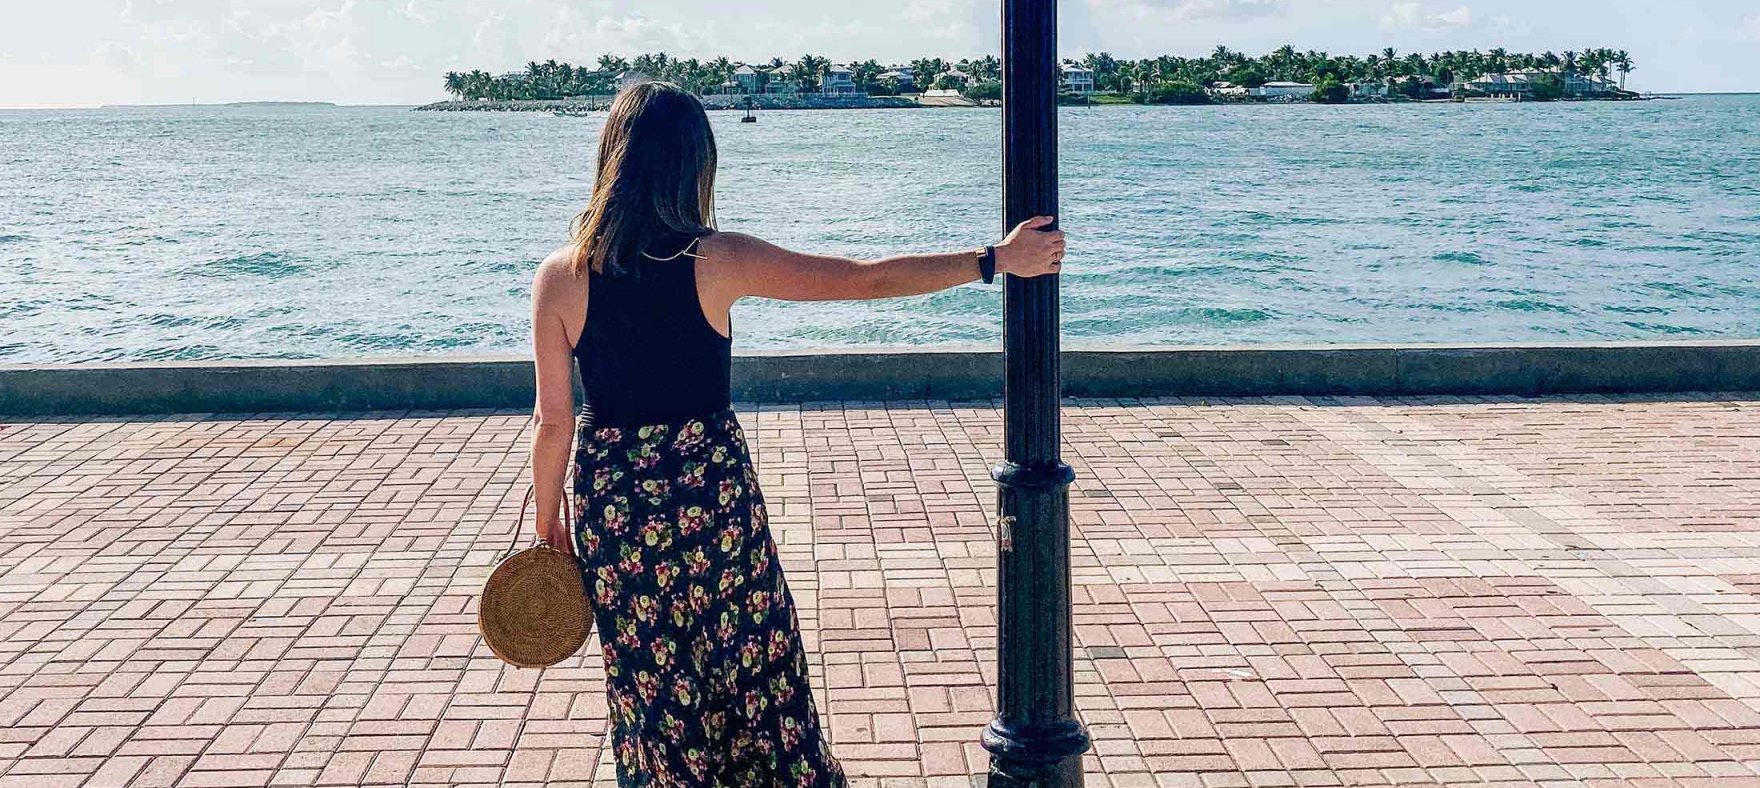 A lady holds on to a lamp post on a boardwalk in Key West, Florida.